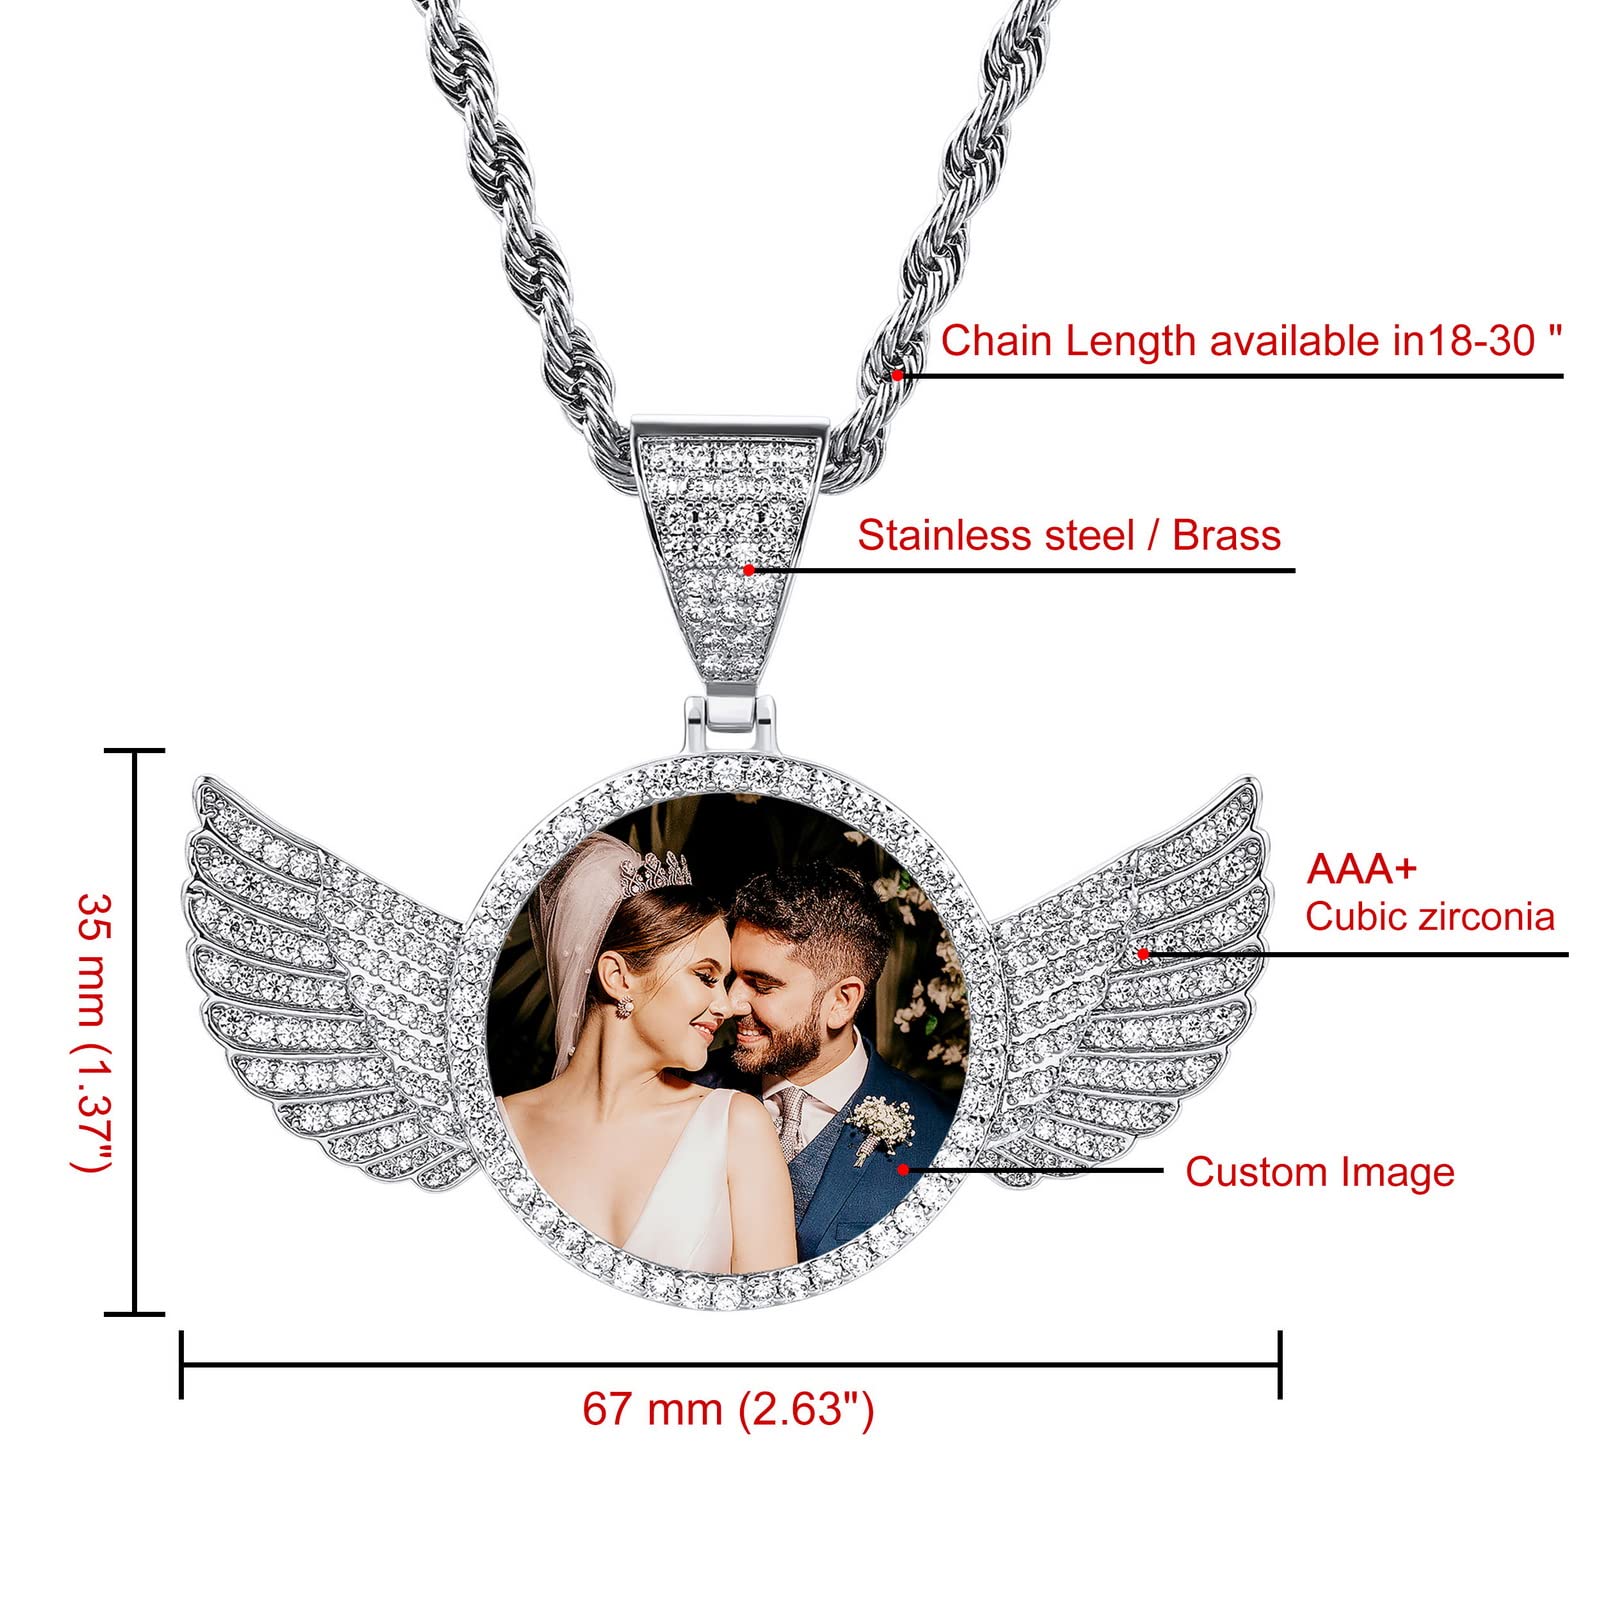 INBLUE Personalized Hip Hop Memory Photo Necklace Pendant Custom Engraved Text for Men Women Copper Iced Out Angel Wing Round & Heart Charm Medal Rope Chain Jewelry Gift